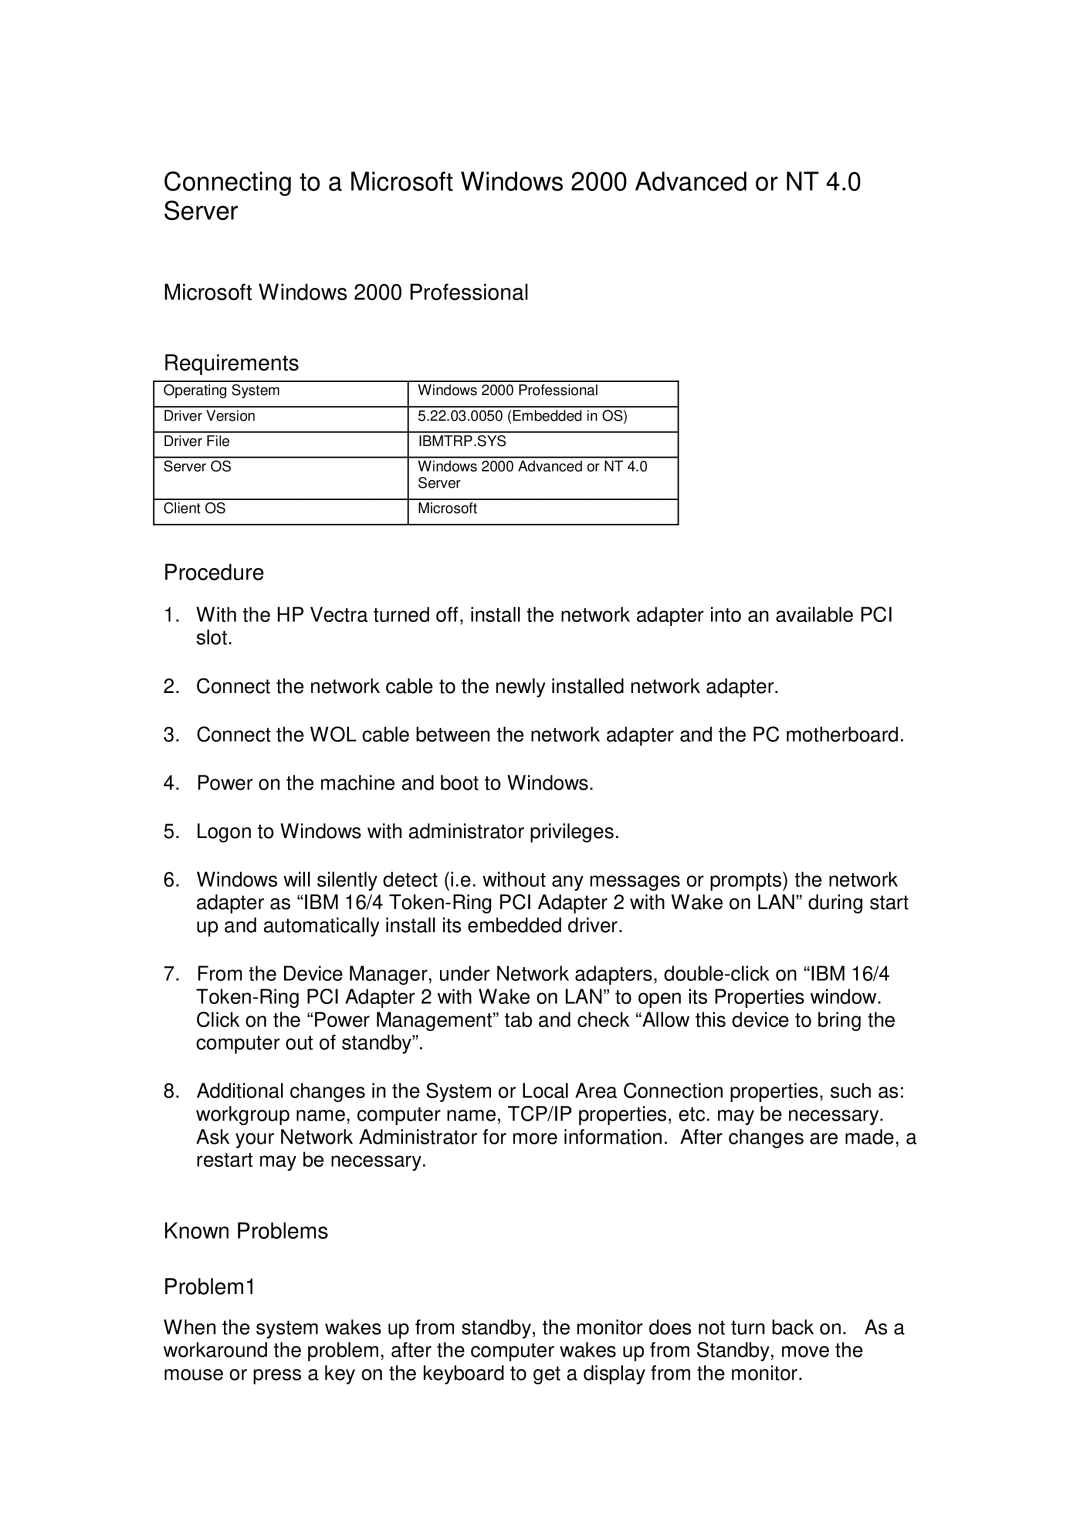 IBM WL2 Connecting to a Microsoft Windows 2000 Advanced or NT 4.0 Server, Microsoft Windows 2000 Professional Requirements 